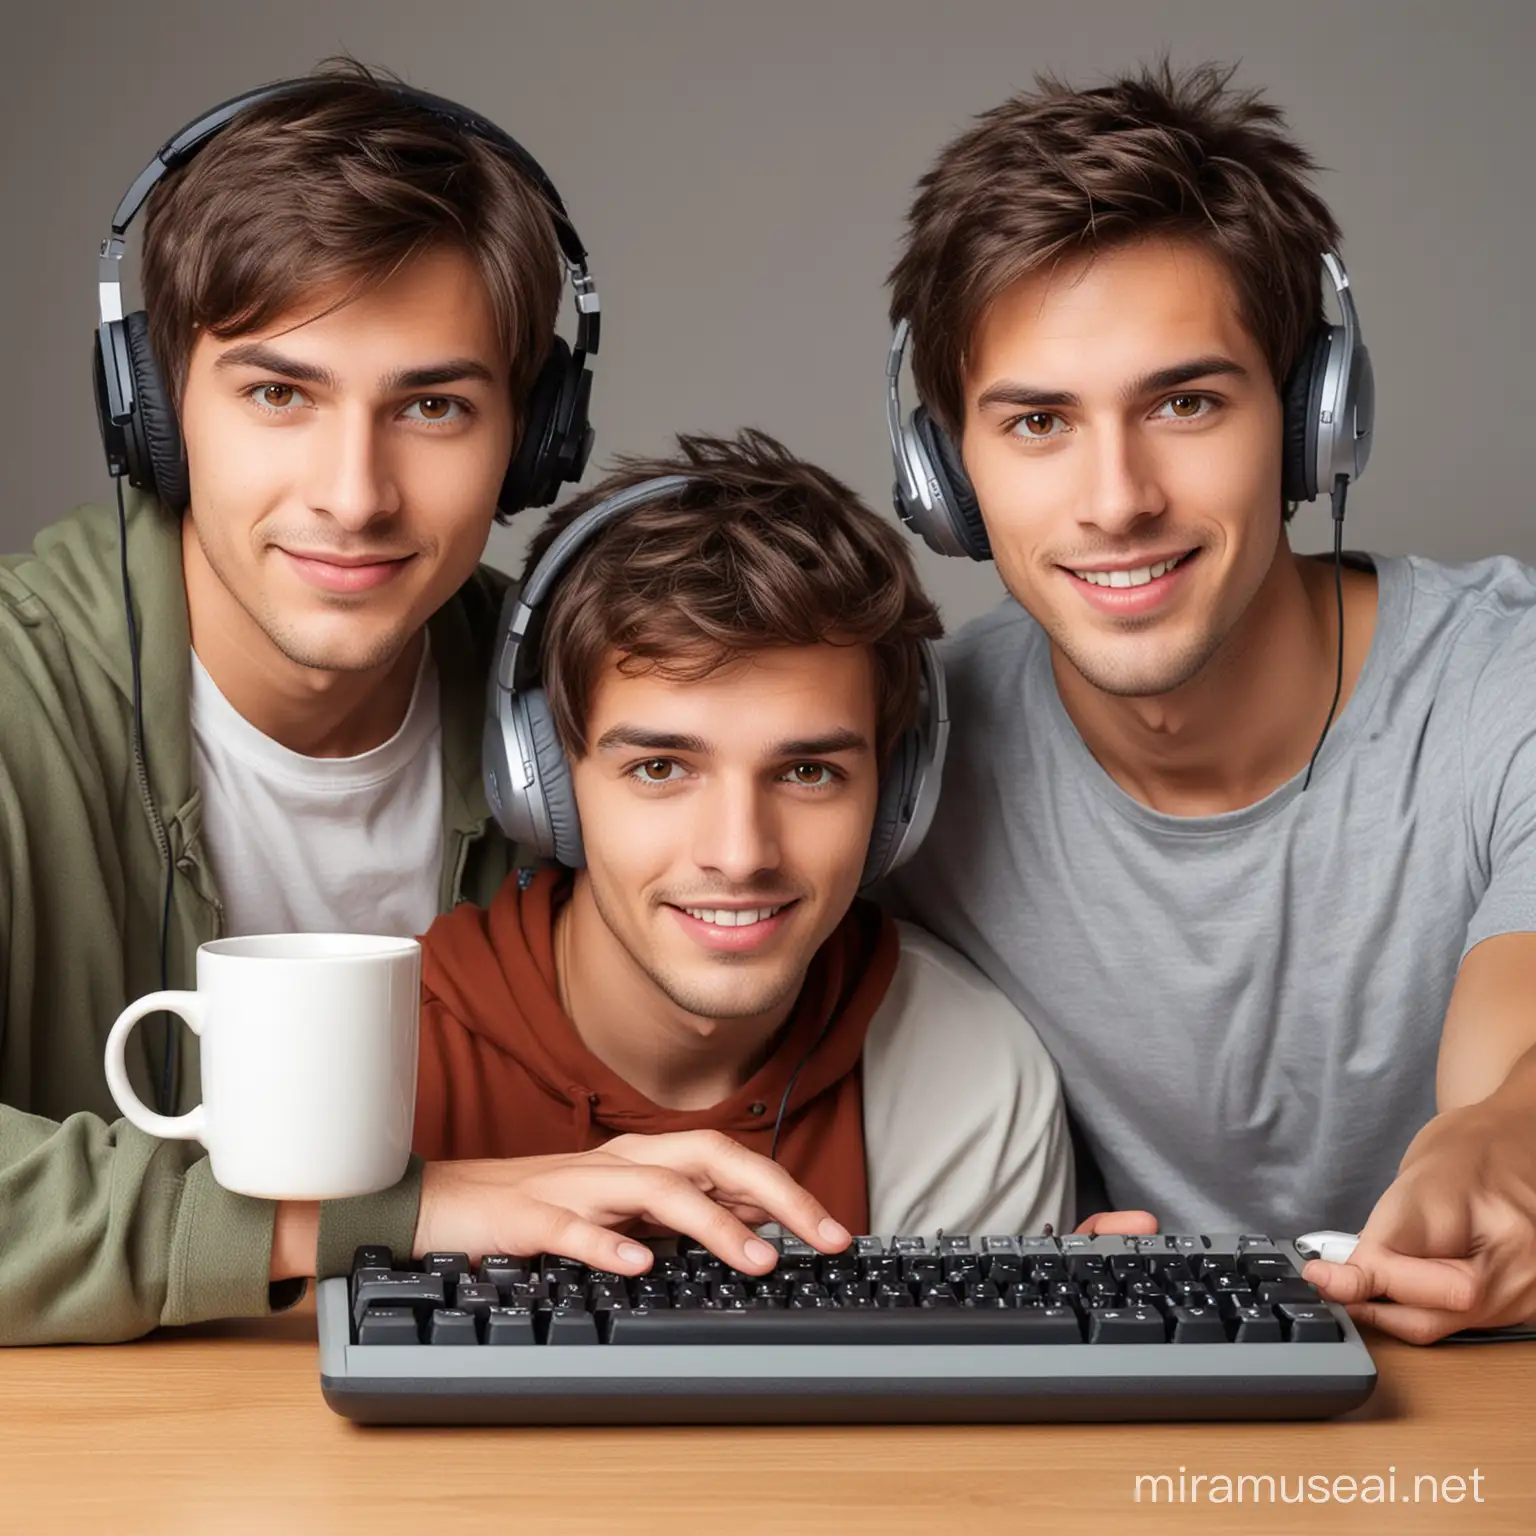 Three Men with Matching Features and Gray Eyes One Holding a Keyboard and Mouse Another with a Tea Mug and the Third Pointing